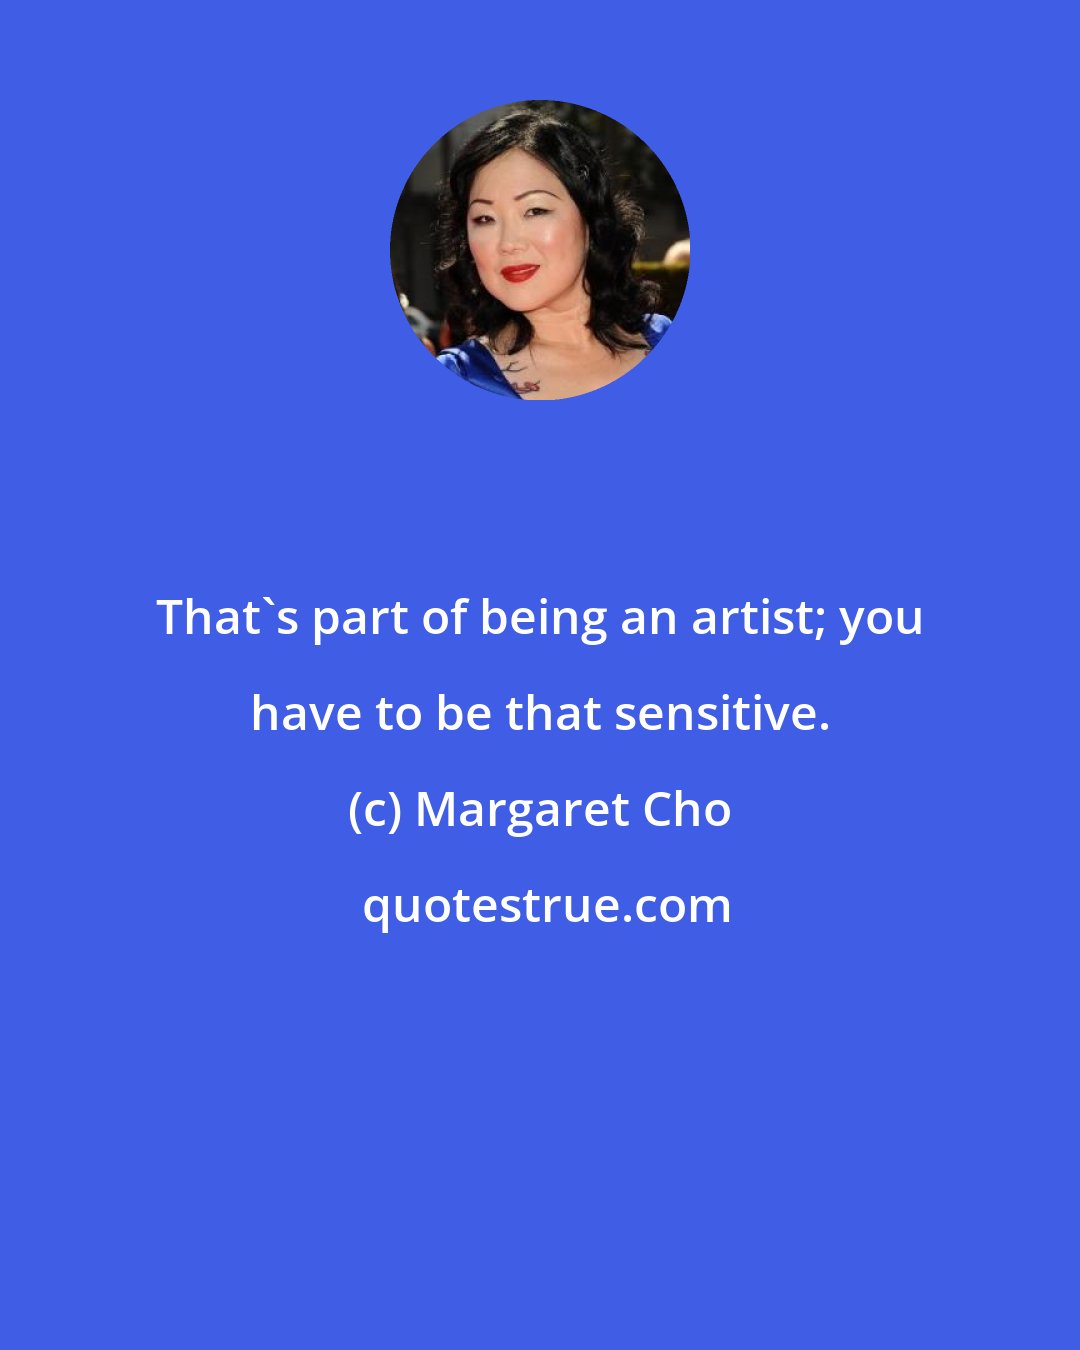 Margaret Cho: That's part of being an artist; you have to be that sensitive.